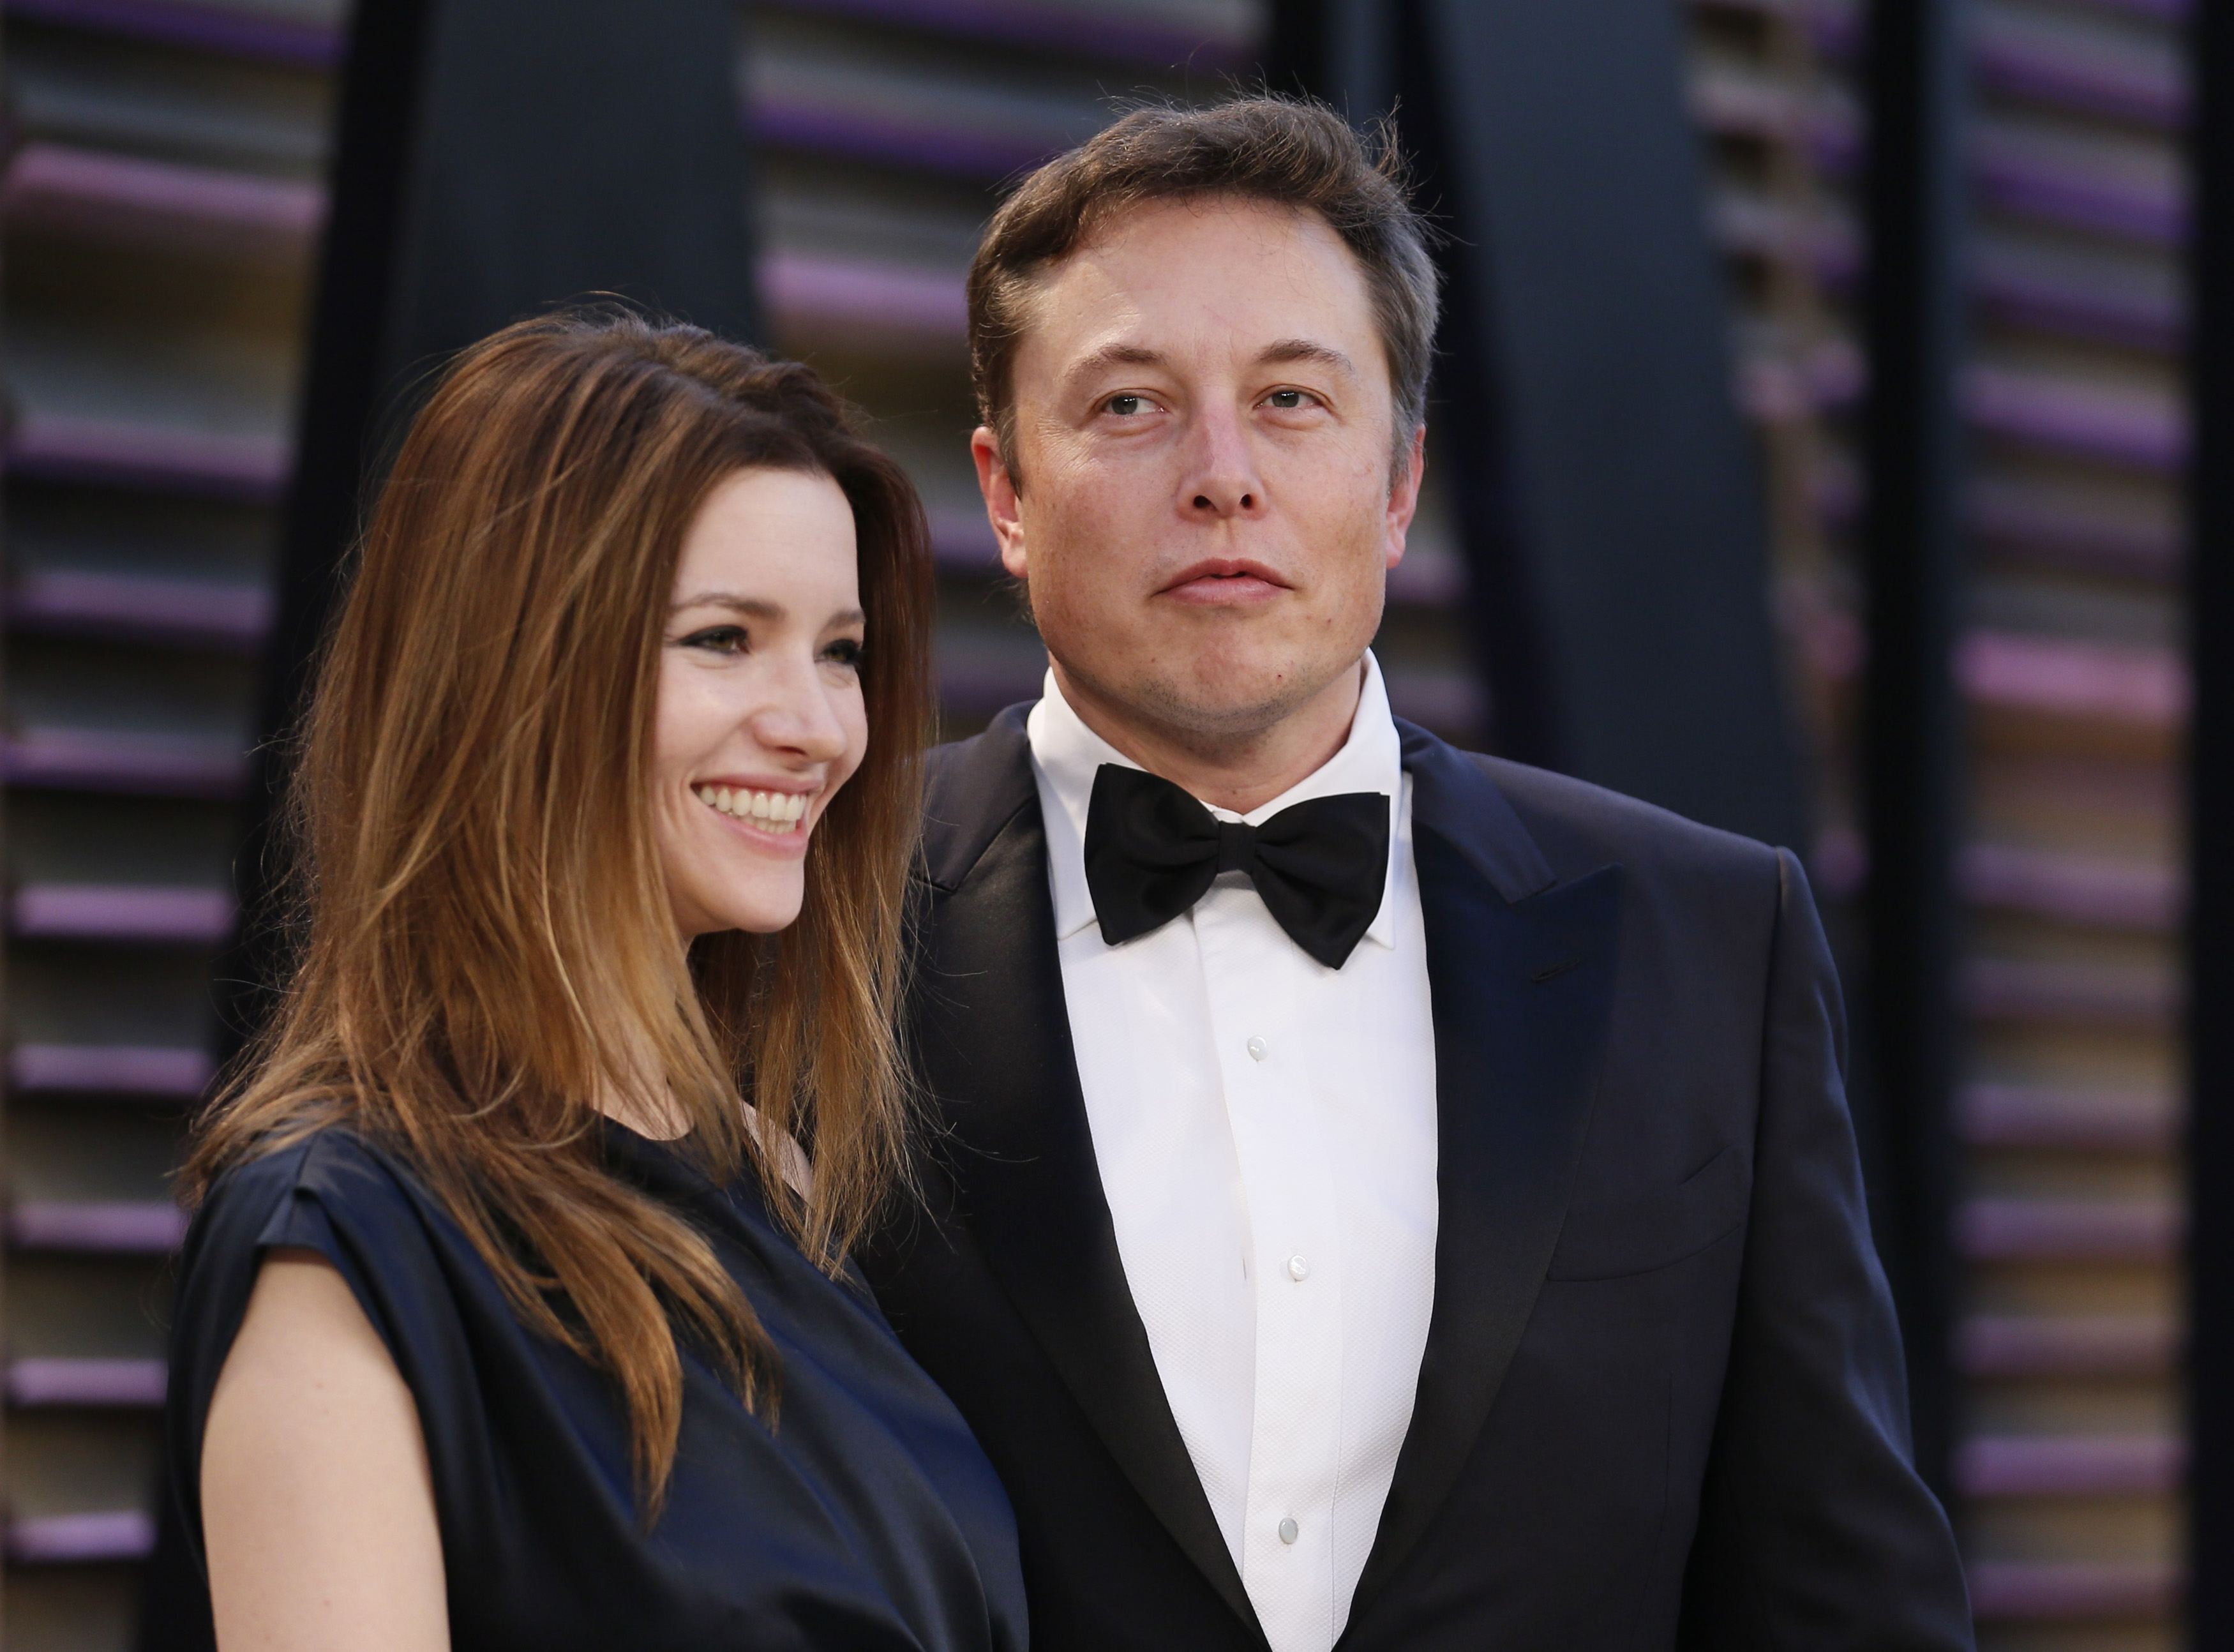 Billionaire Elon Musk's Wife Talulah Riley To Get 16 Million After